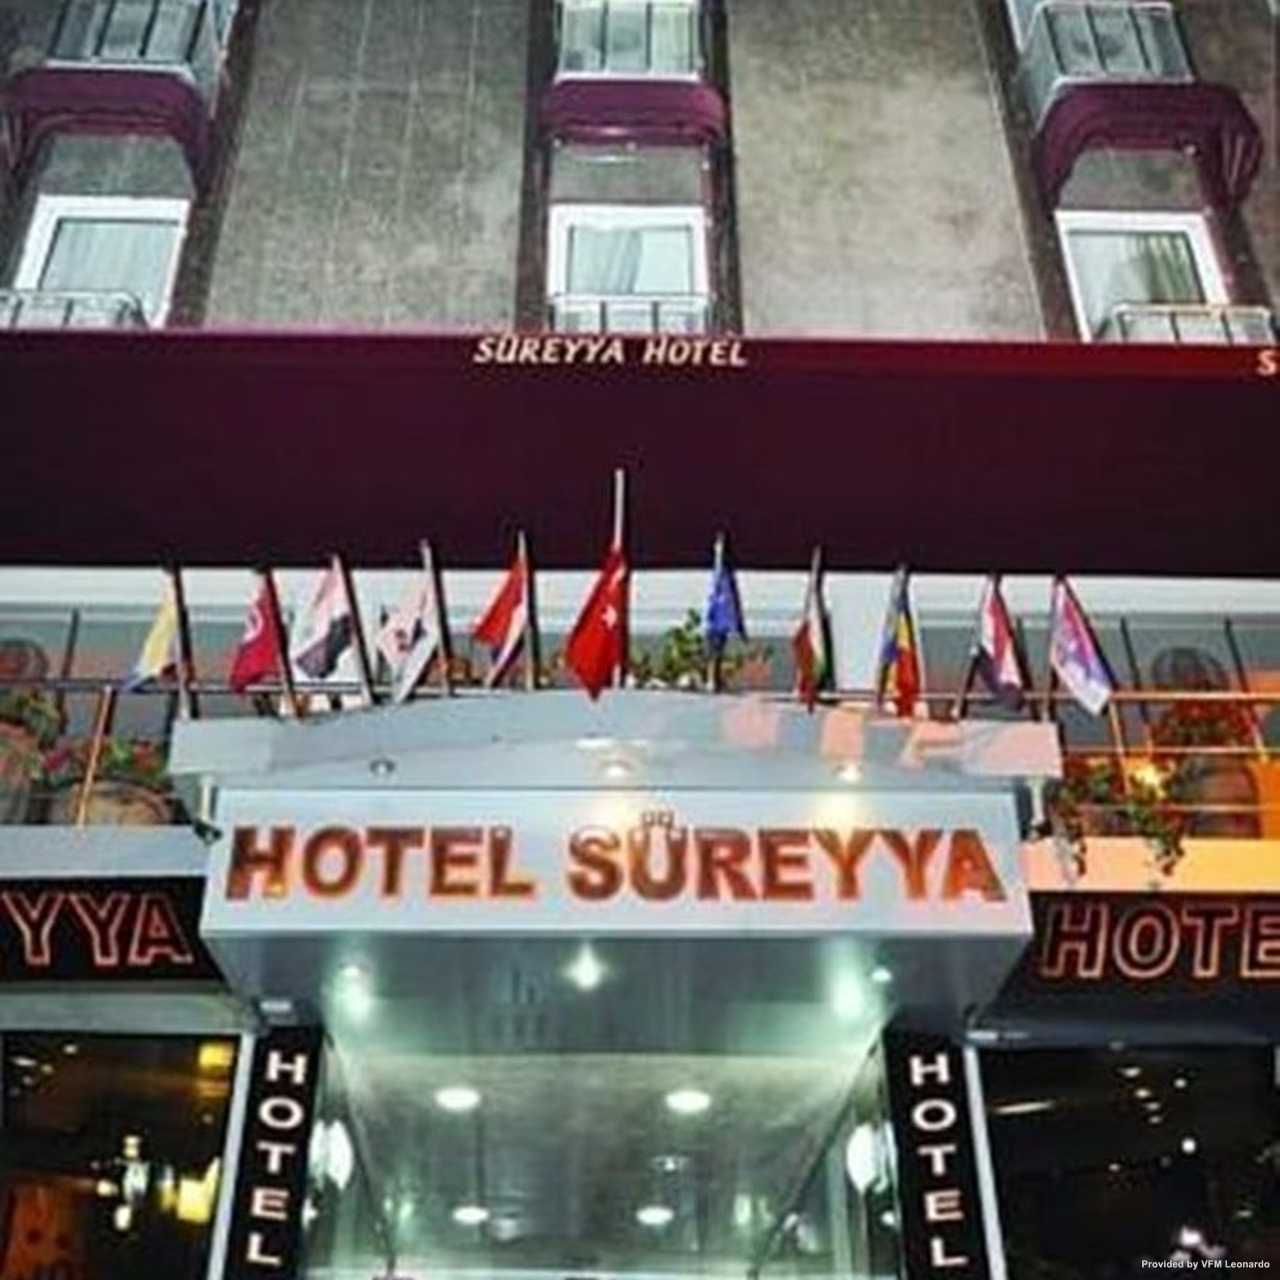 hotel sureyya turkey at hrs with free services